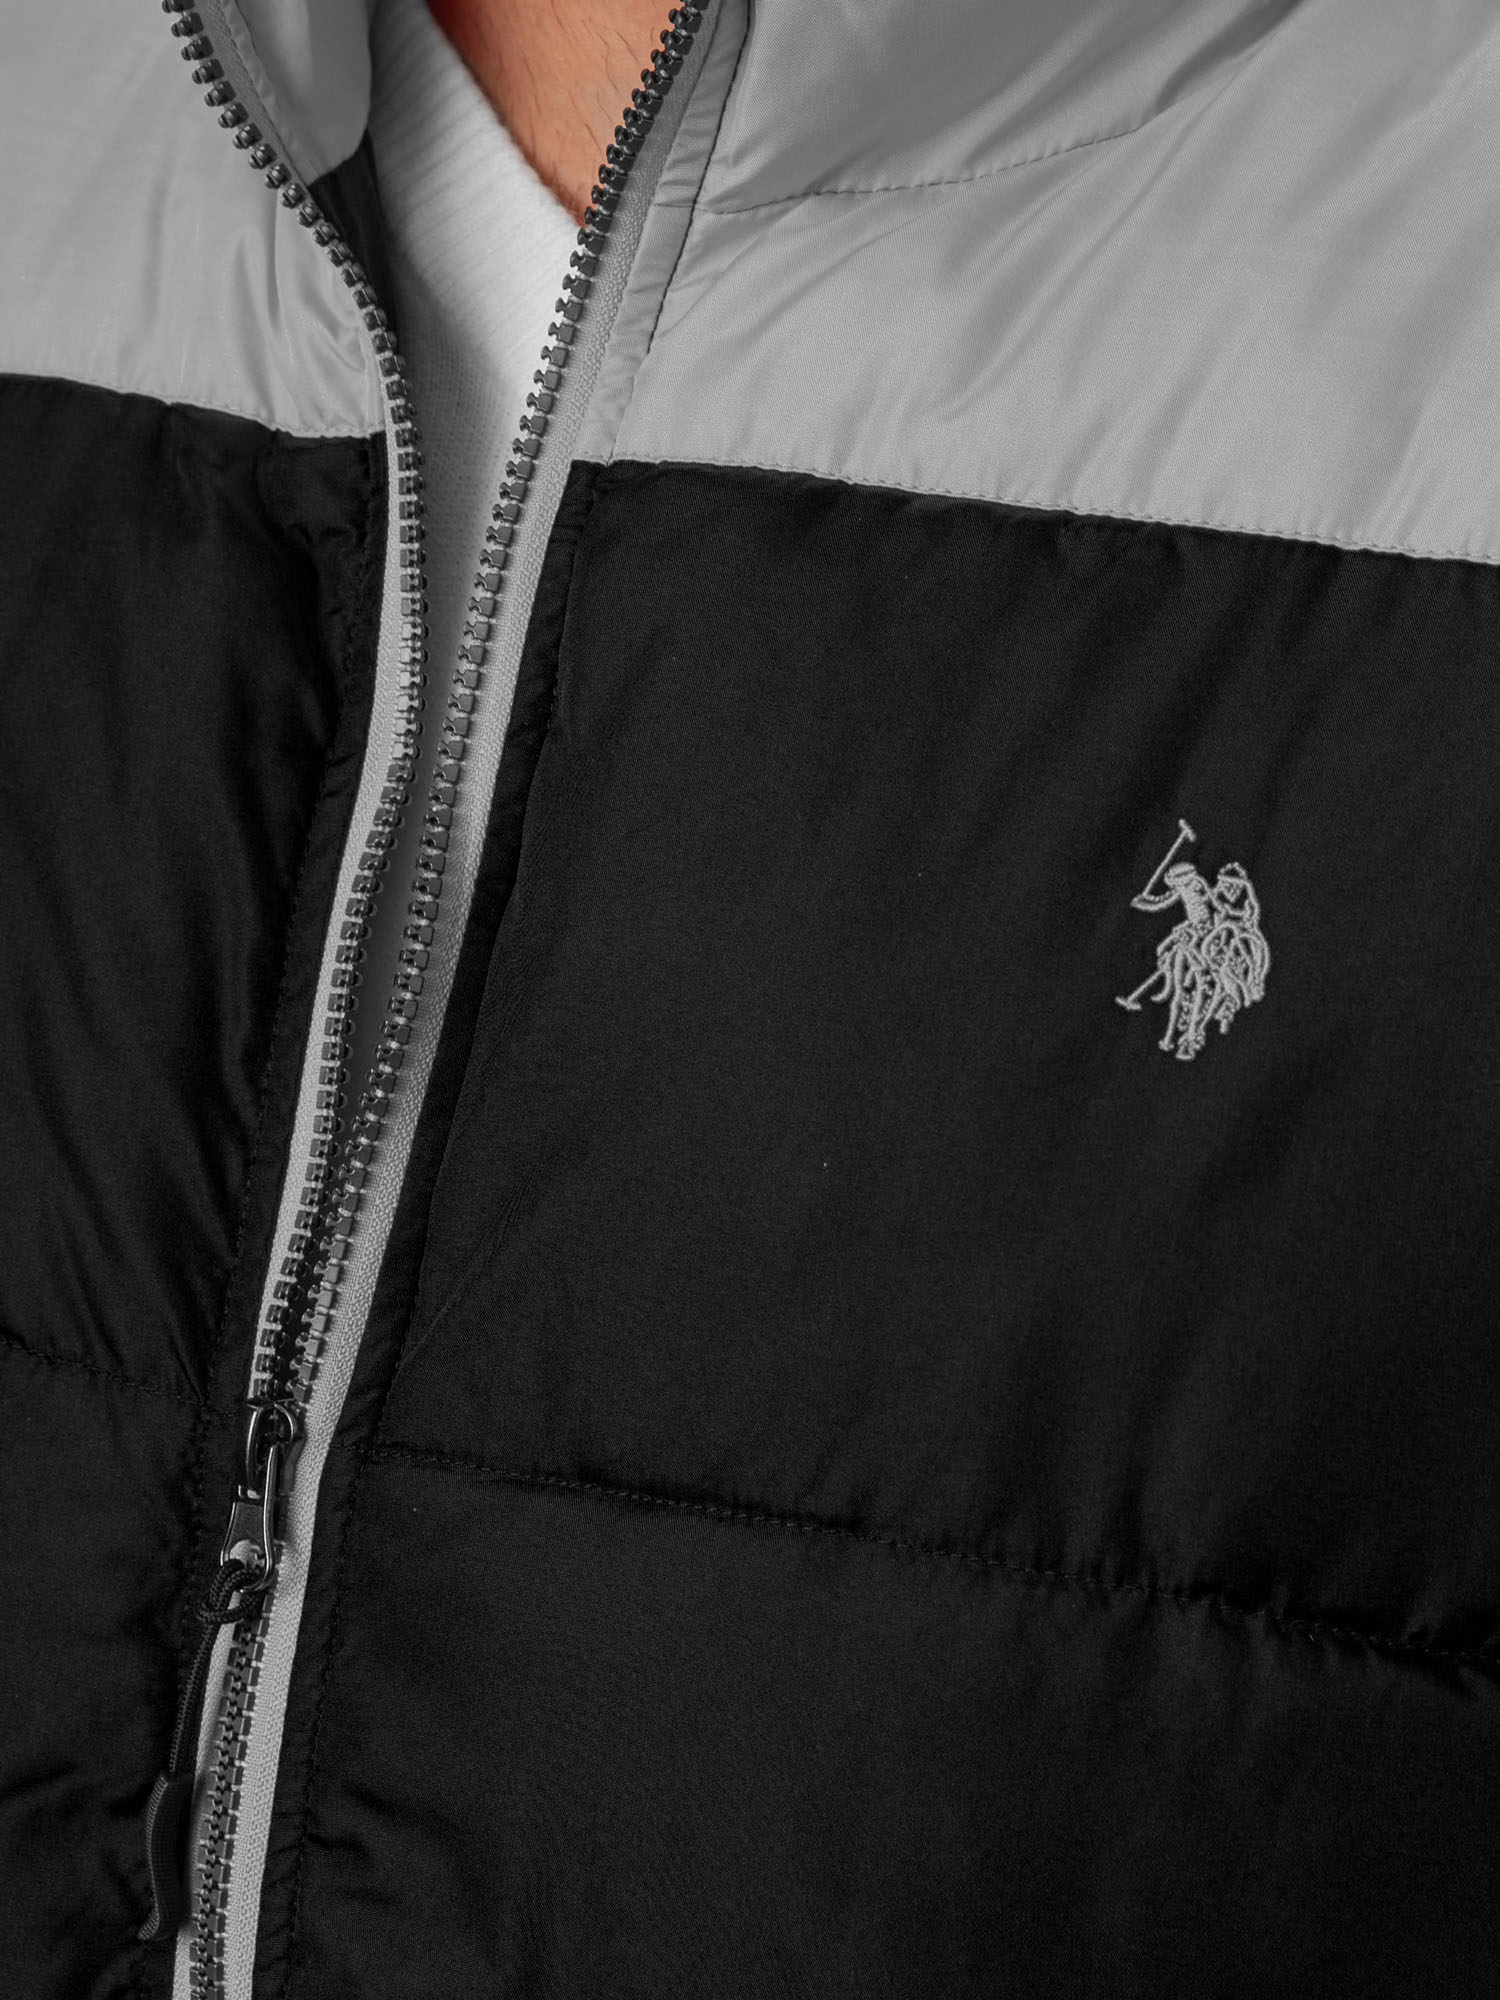 U.S. Polo Assn. Puffer Vest - image 4 of 6